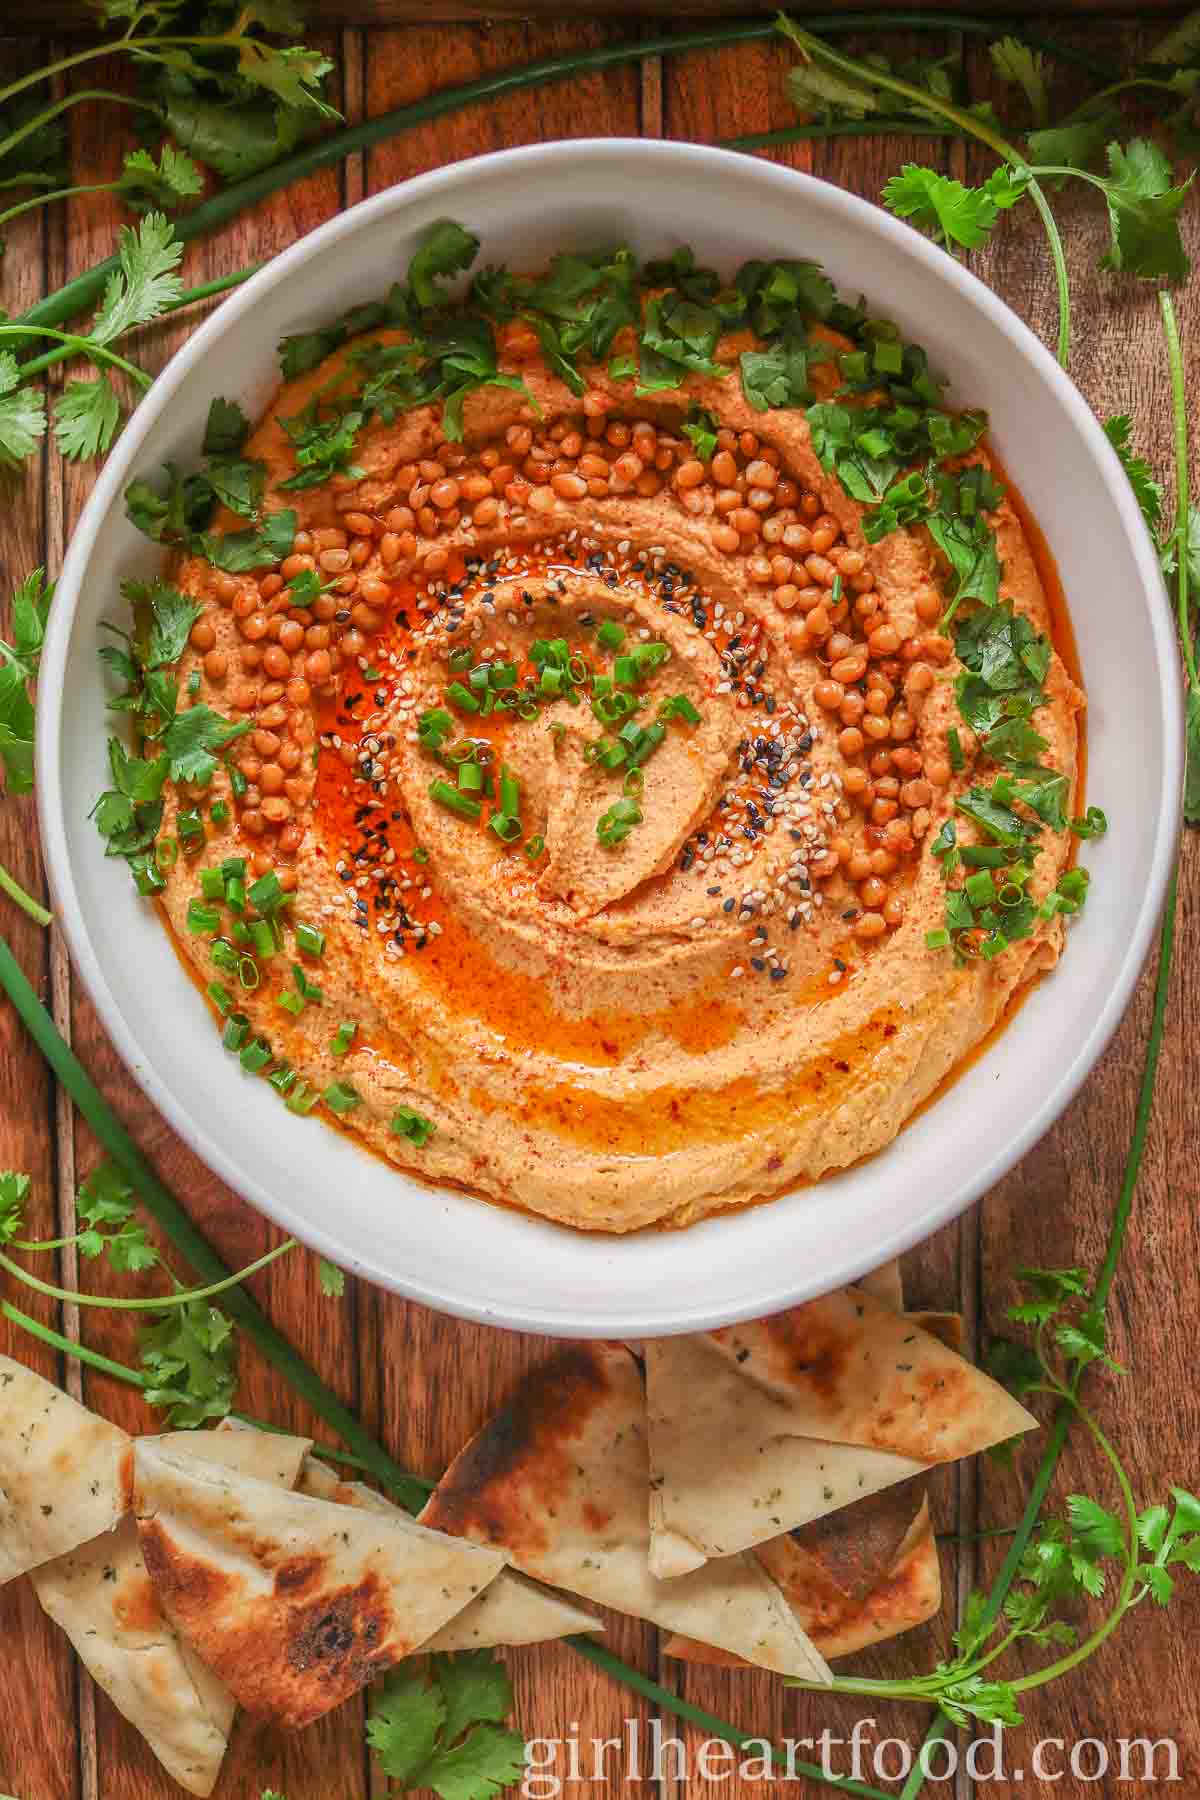 Bowl of lentil hummus garnished with toppings, next to pita bread, green onion and cilantro.